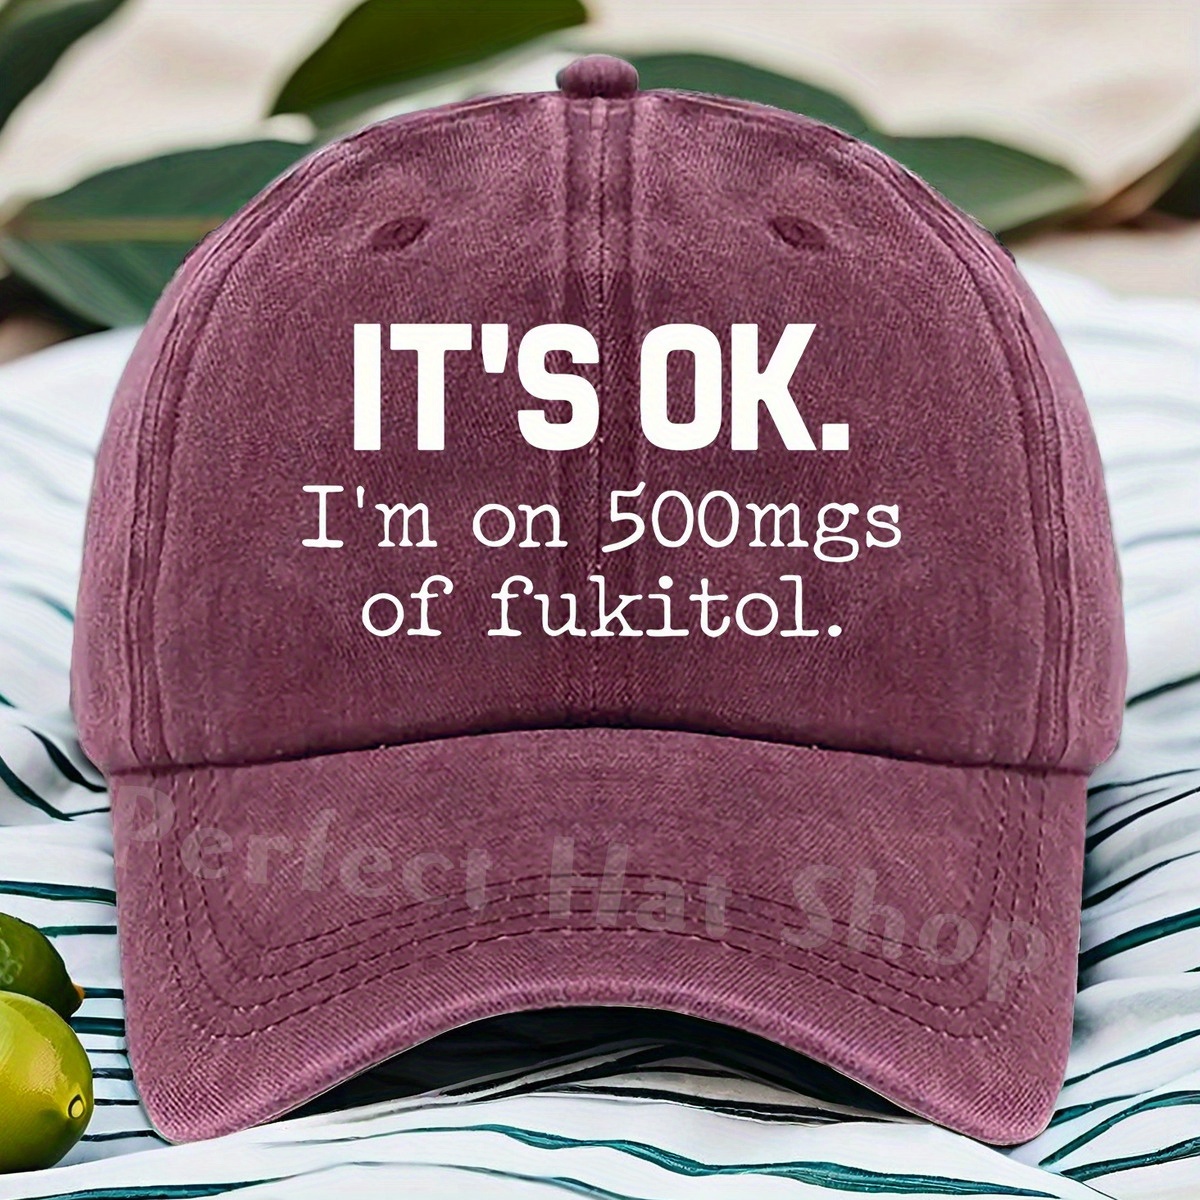 

it's Ok I'm On 500mgs Of Fukitol" Adjustable Baseball Cap - Cotton Sun Protection Hat With Printed Humor Design, Unisex Casual Wear